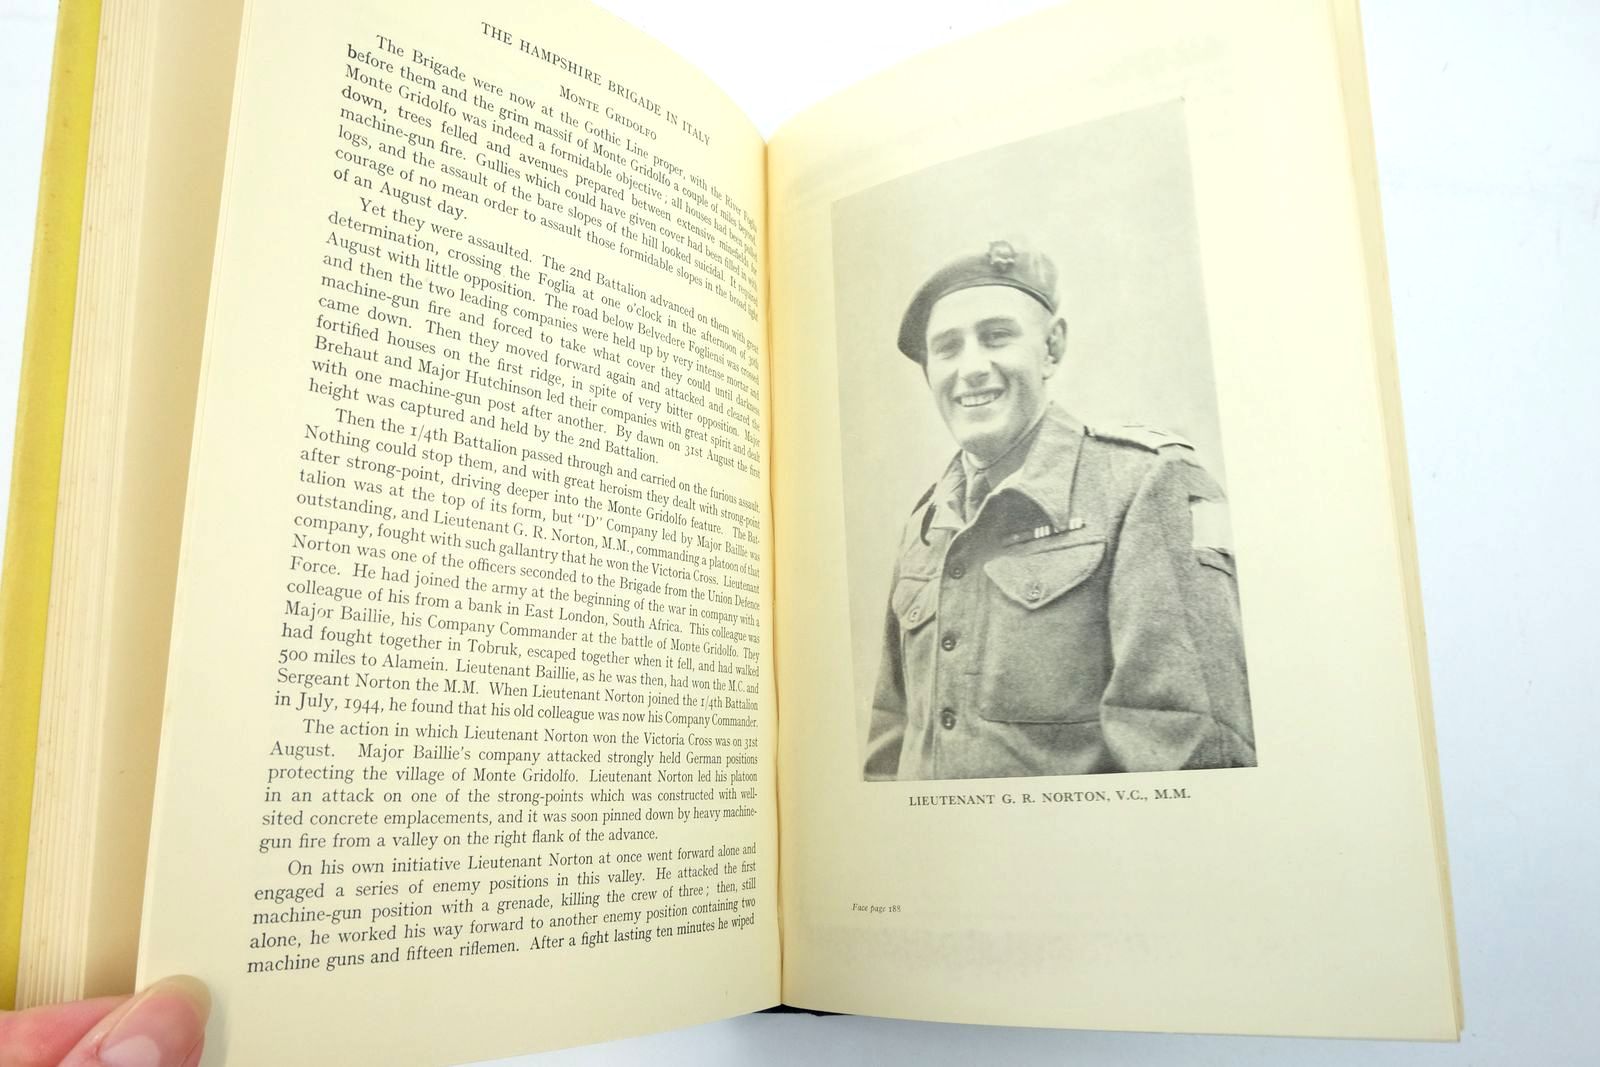 Photo of REGIMENTAL HISTORY THE ROYAL HAMPSHIRE REGIMENT VOLUME THREE 1918-1954 written by Daniell, David Scott published by Gale & Polden, Ltd. (STOCK CODE: 2137734)  for sale by Stella & Rose's Books